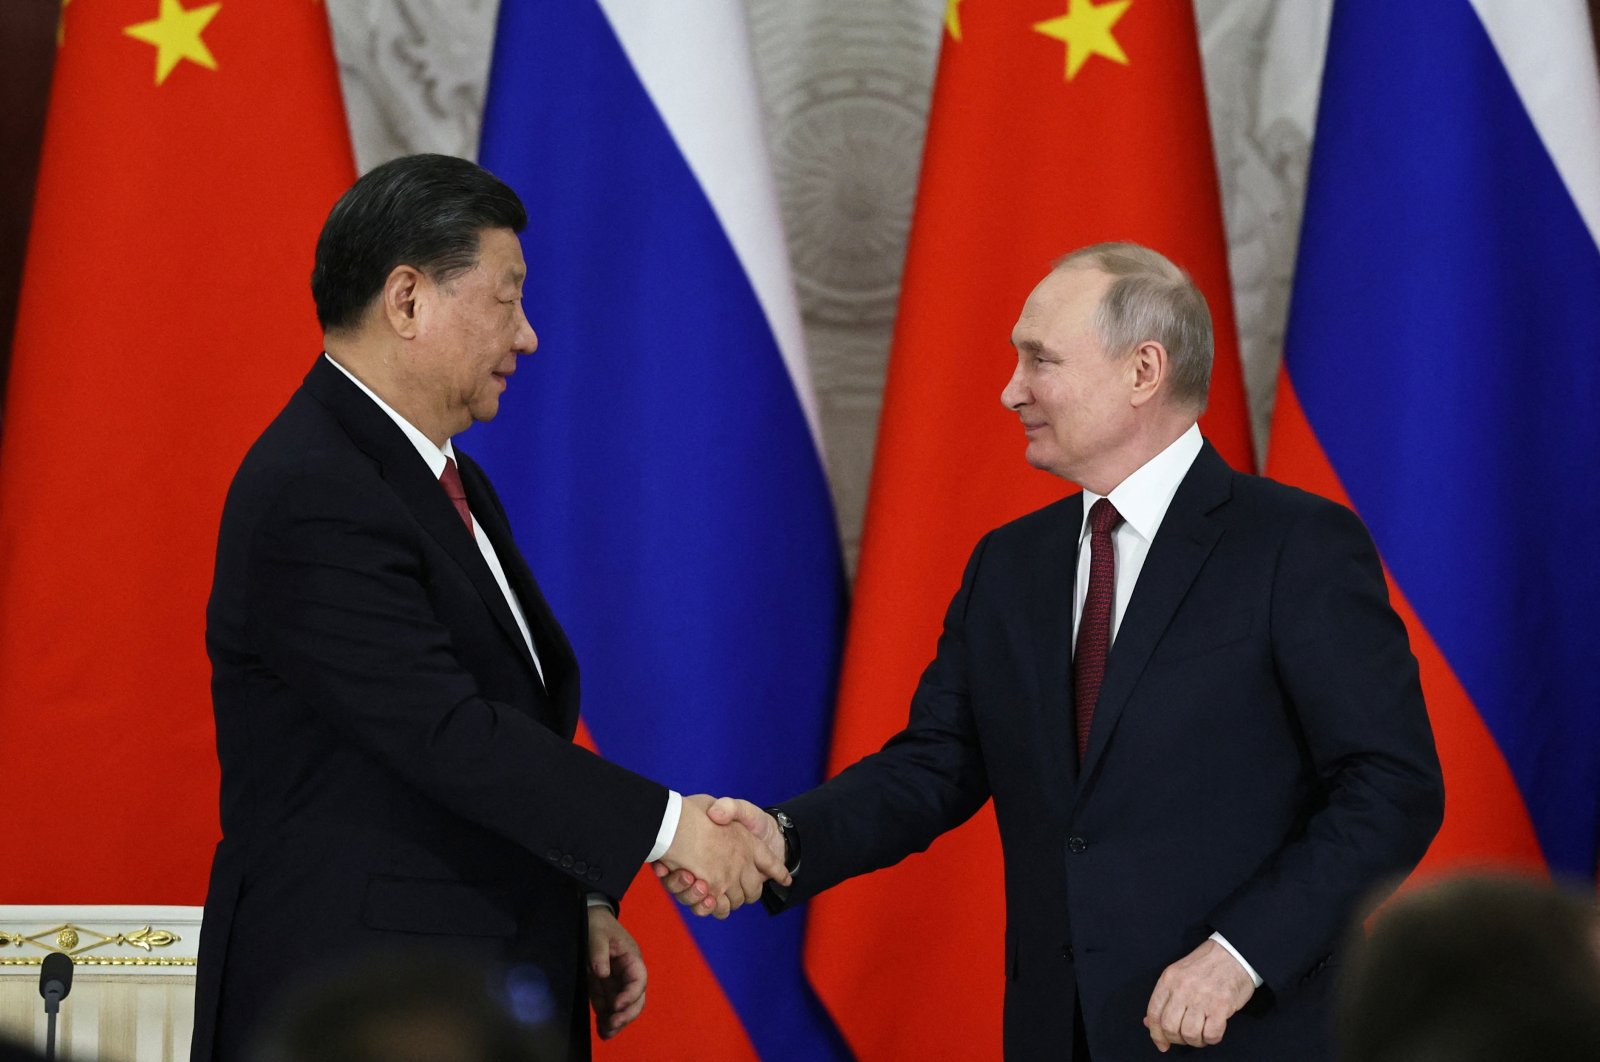 Russian President Vladimir Putin (R) shakes hands with Chinese President Xi Jinping during a signing ceremony following their talks at the Kremlin in Moscow, Russia, March 21, 2023. (Reuters Photo)